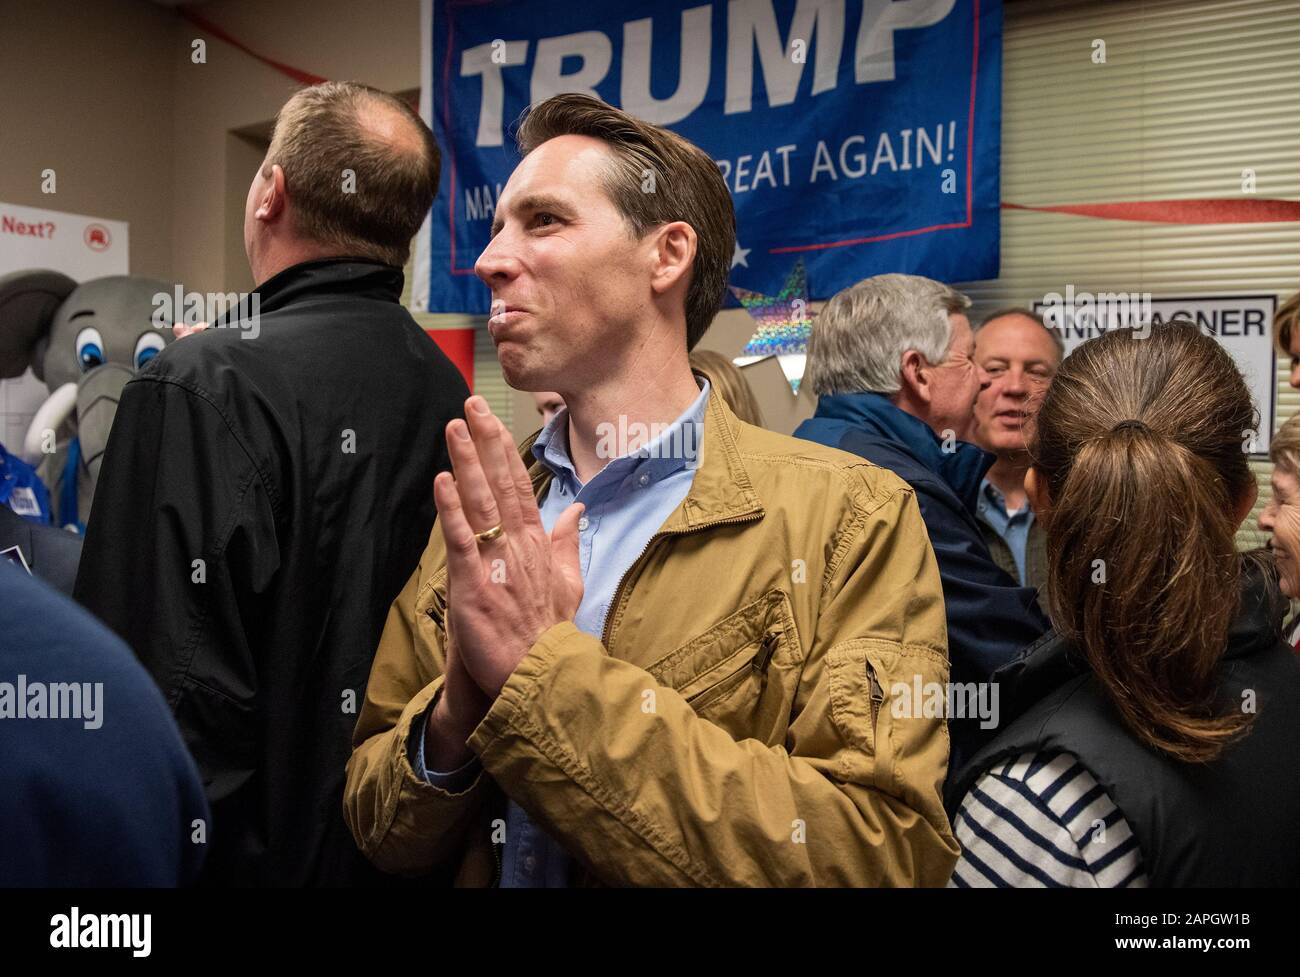 US Senate candidate Josh Hawley campaigns during his successful run for office near St. Louis, MO, USA Monday, Nov. 5, 2018. Stock Photo